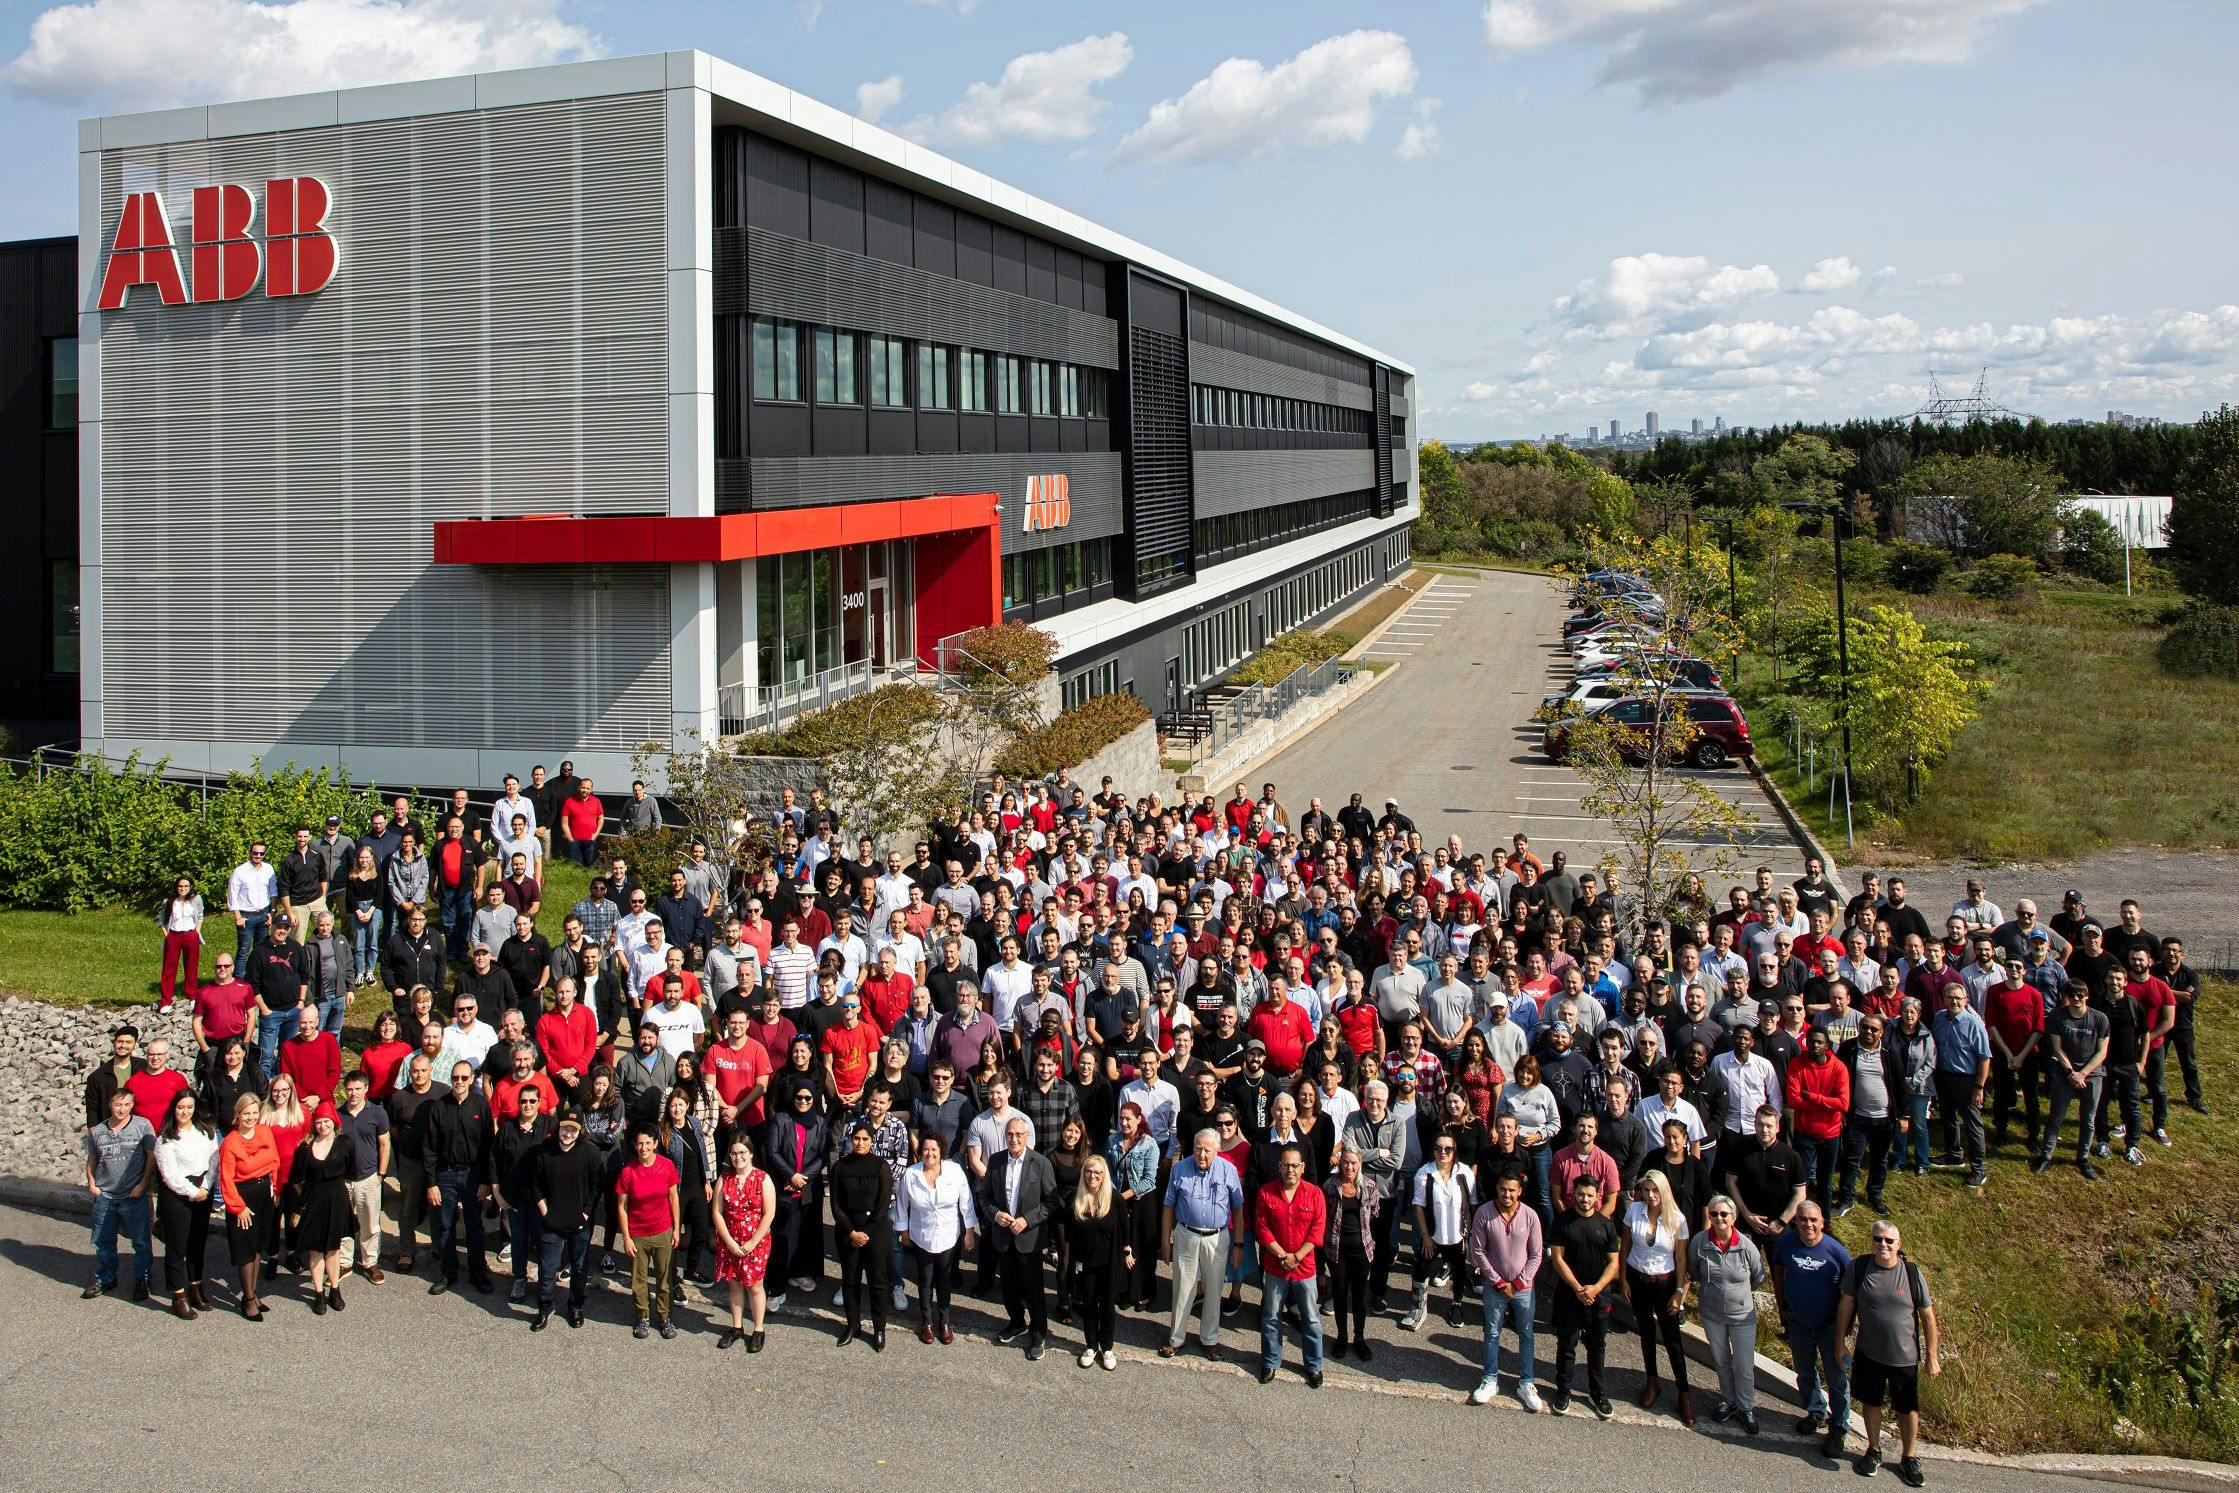 ABB’S Quebec factory employees